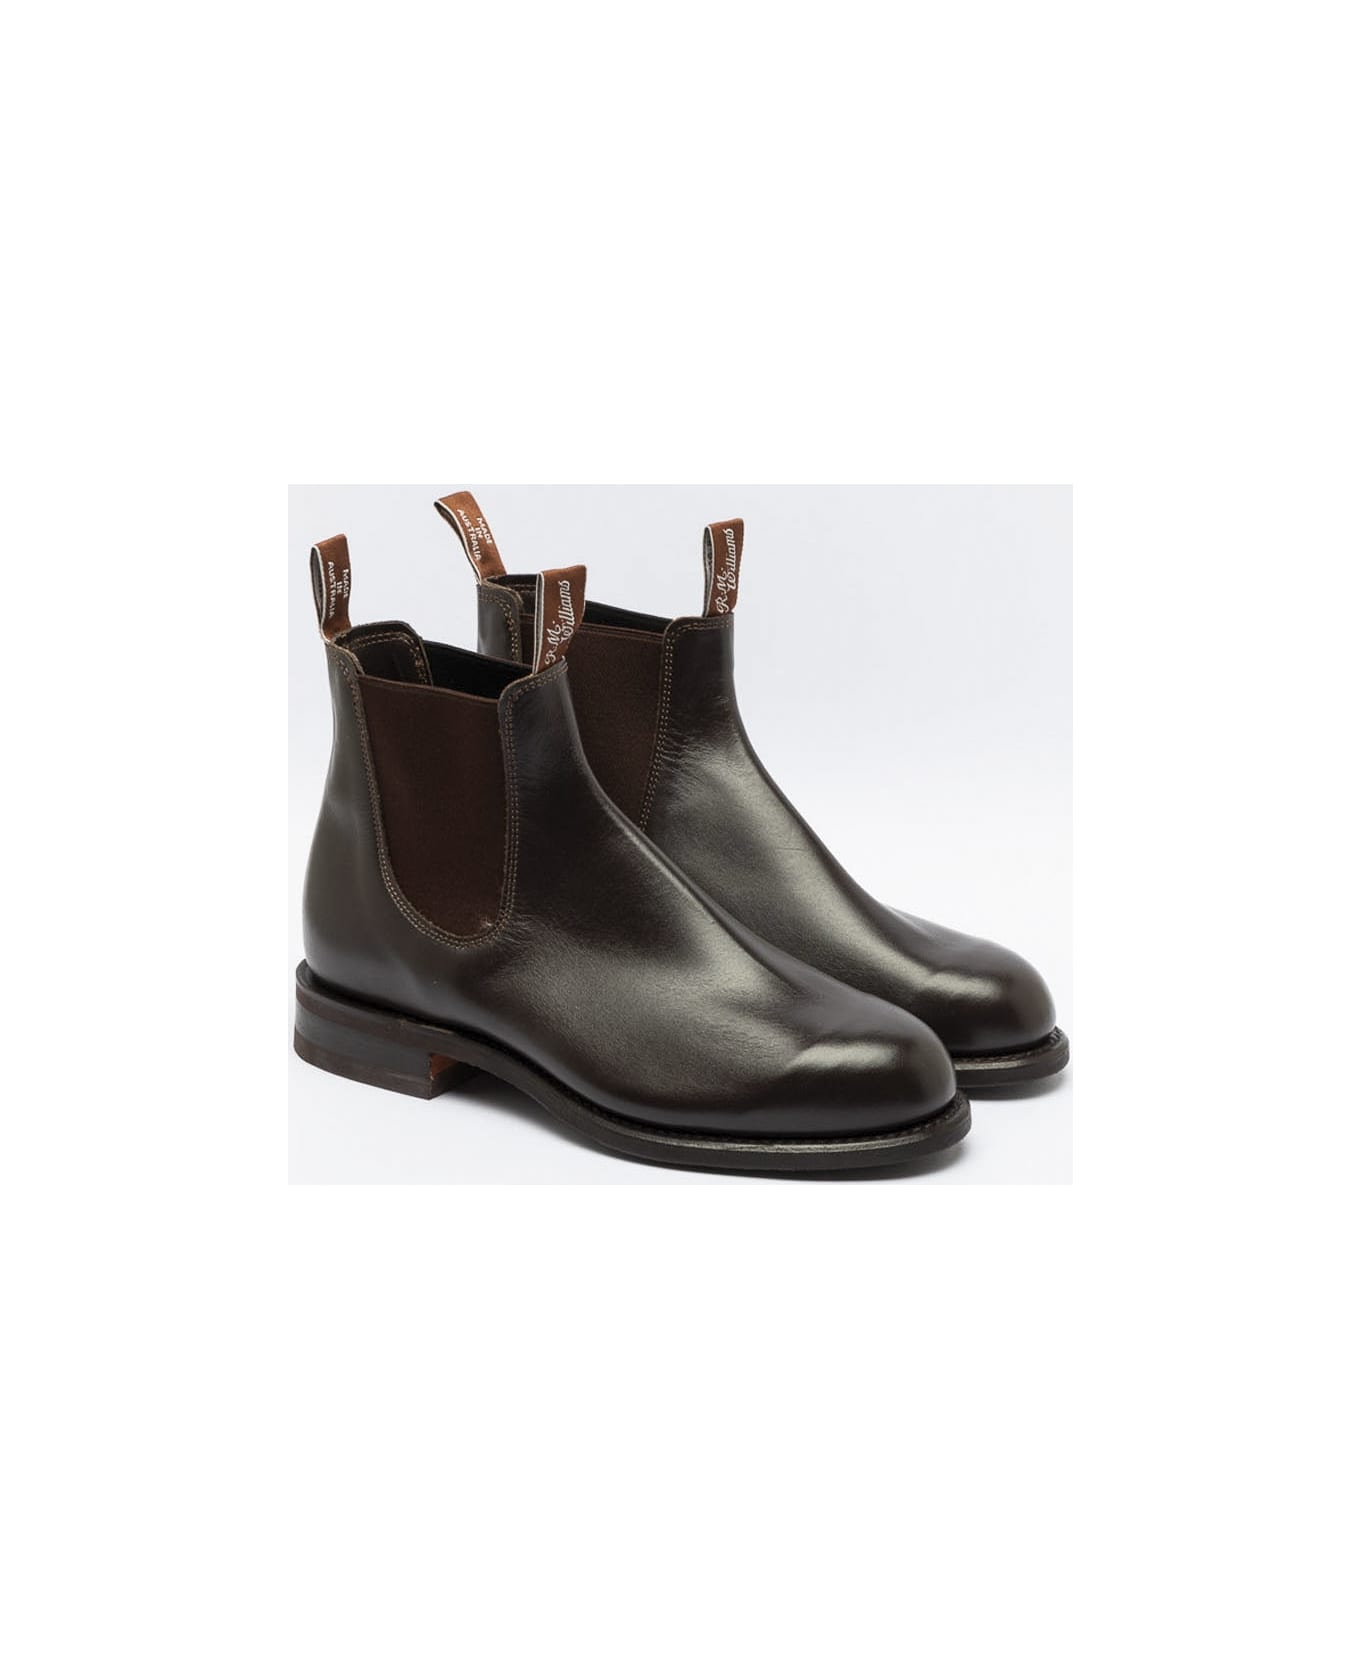 R.M.Williams Comfort Turnout Chestnut Yearling Leather Chelsea Boot - Marrone